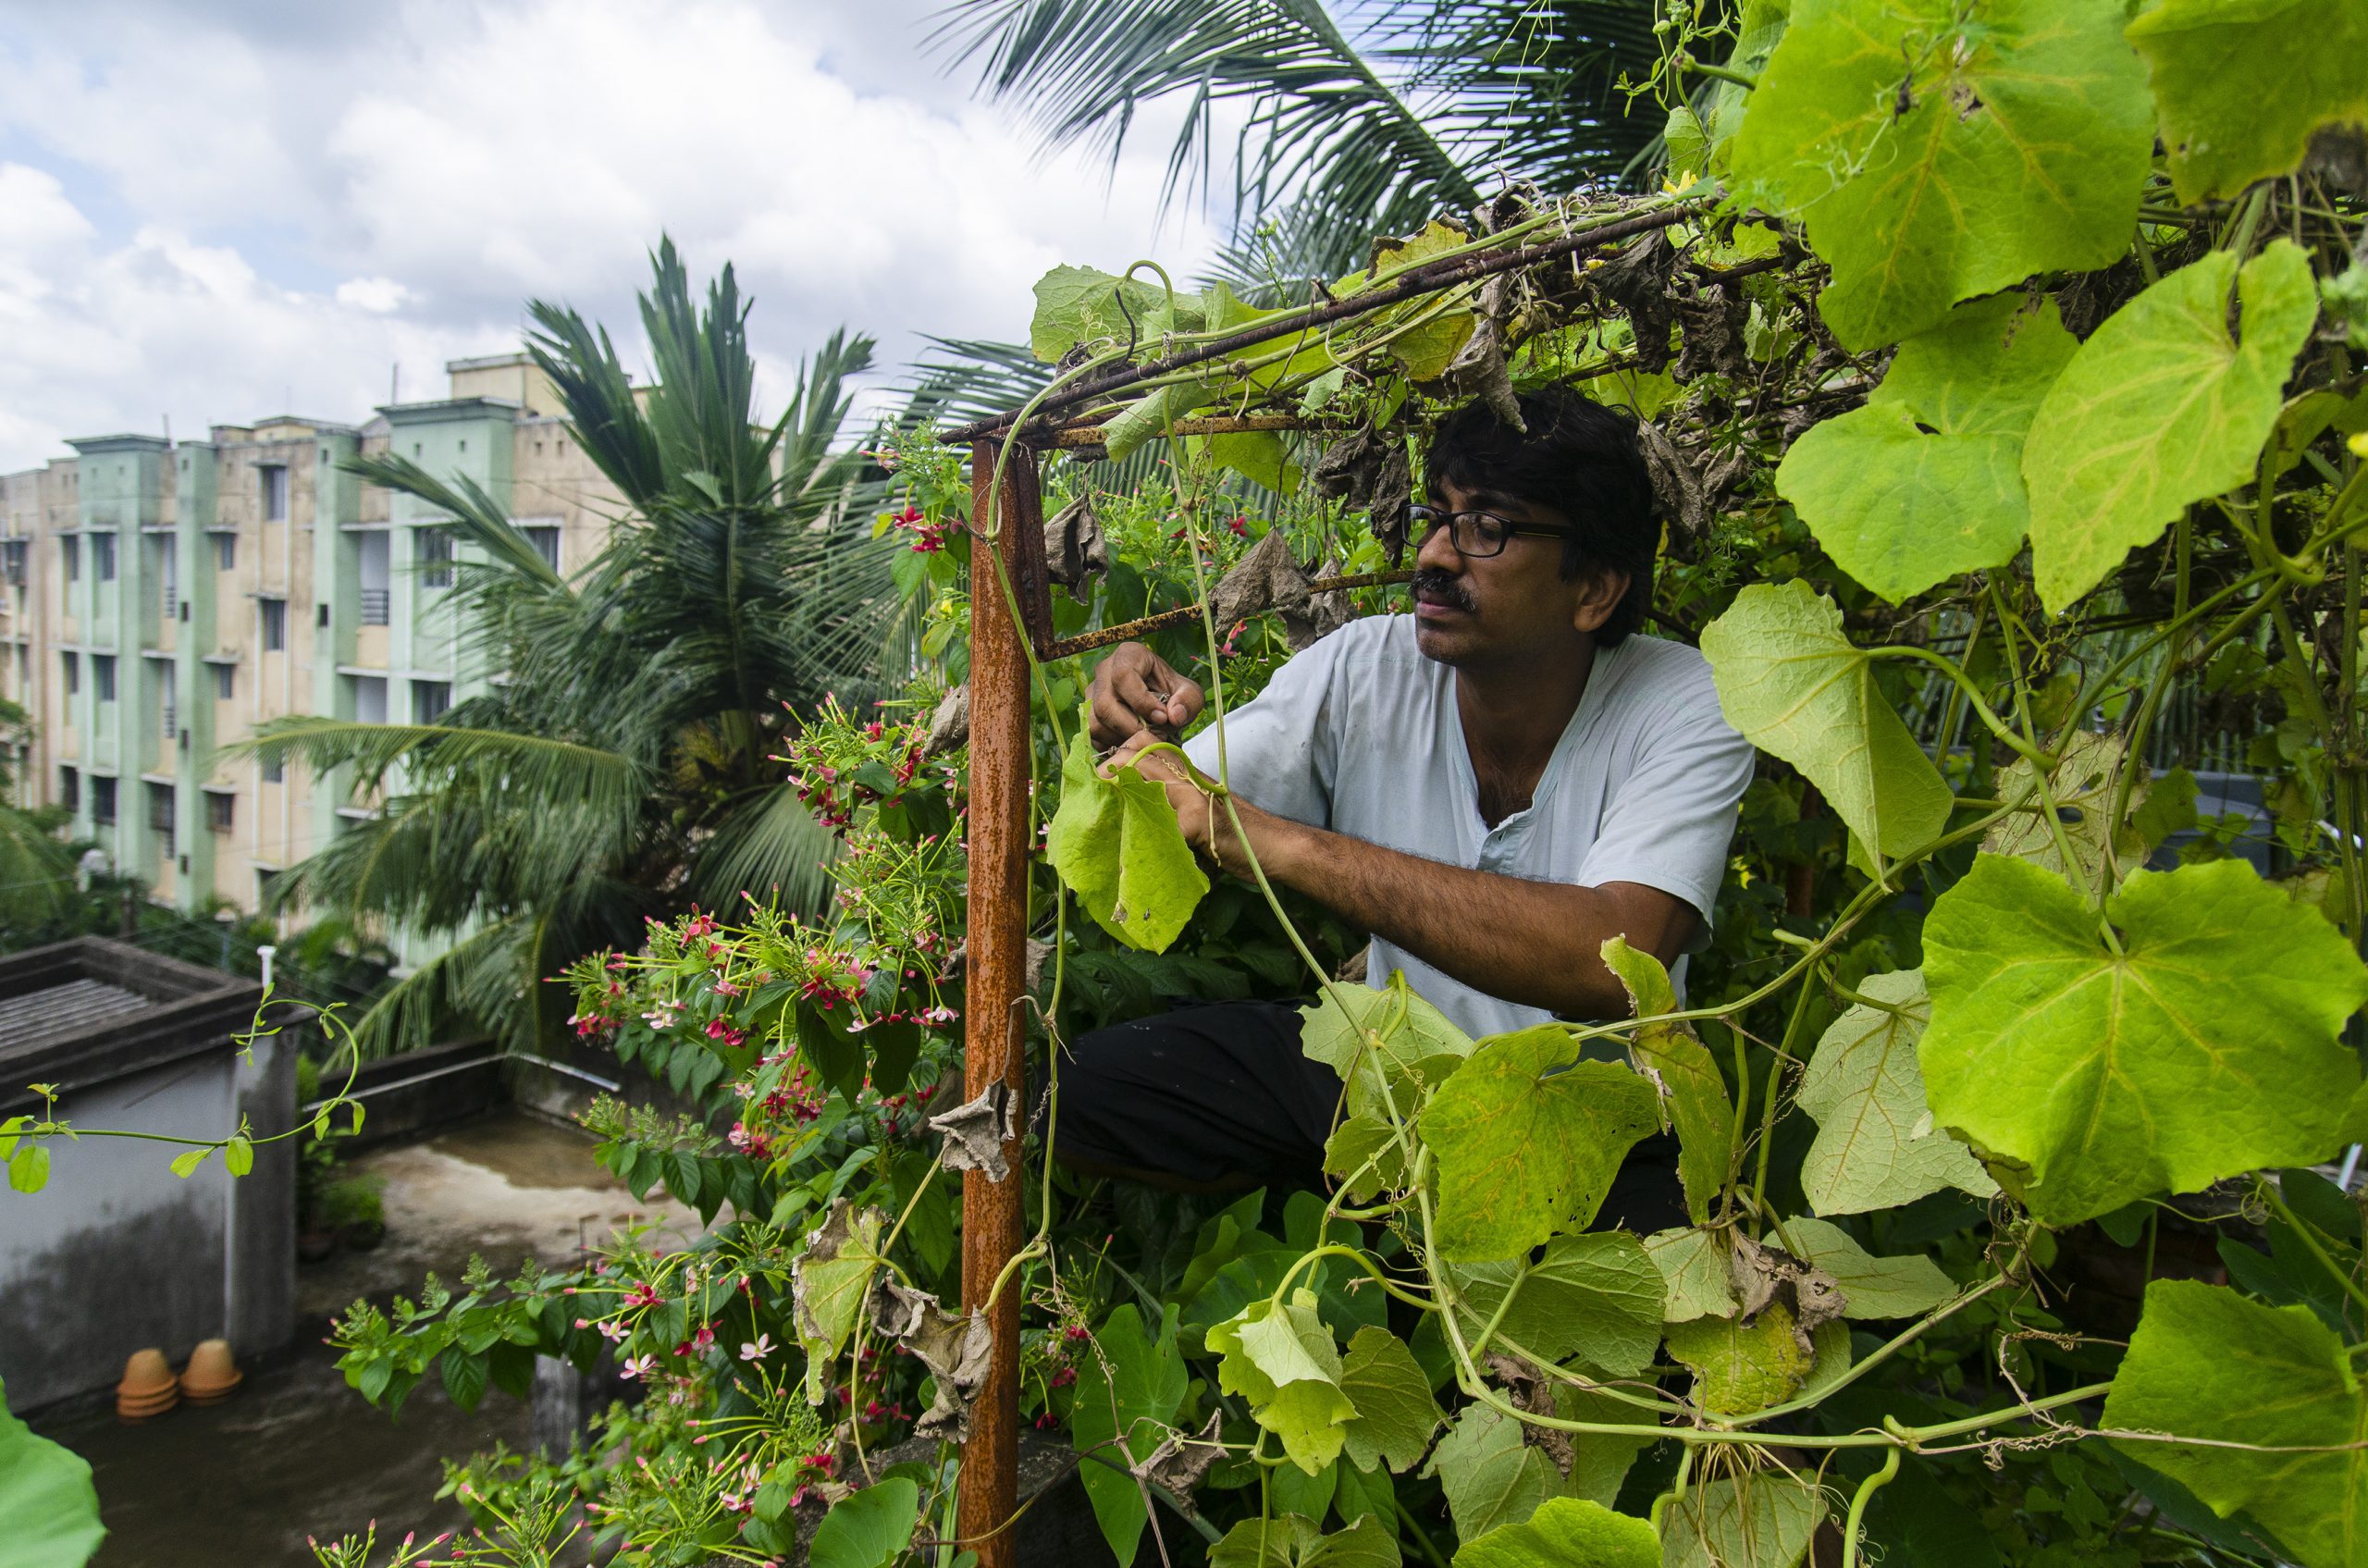 A men tending his plants and vines in a rooftop garden in Kolkata.